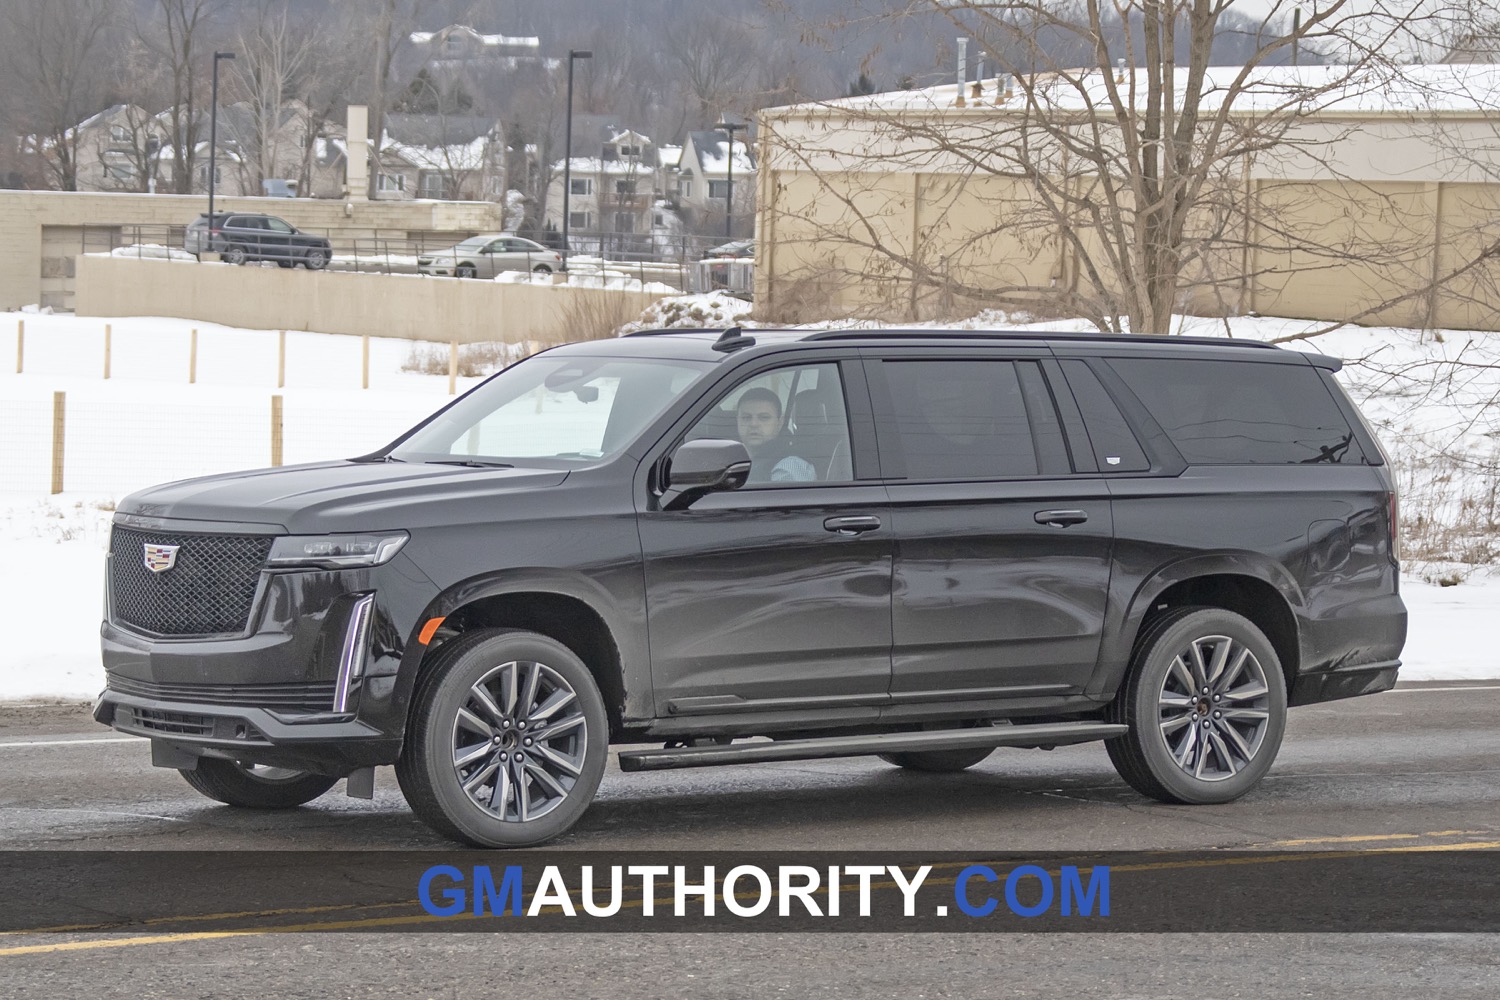 2021 Cadillac Escalade Esv Spotted On The Street Gm Authority